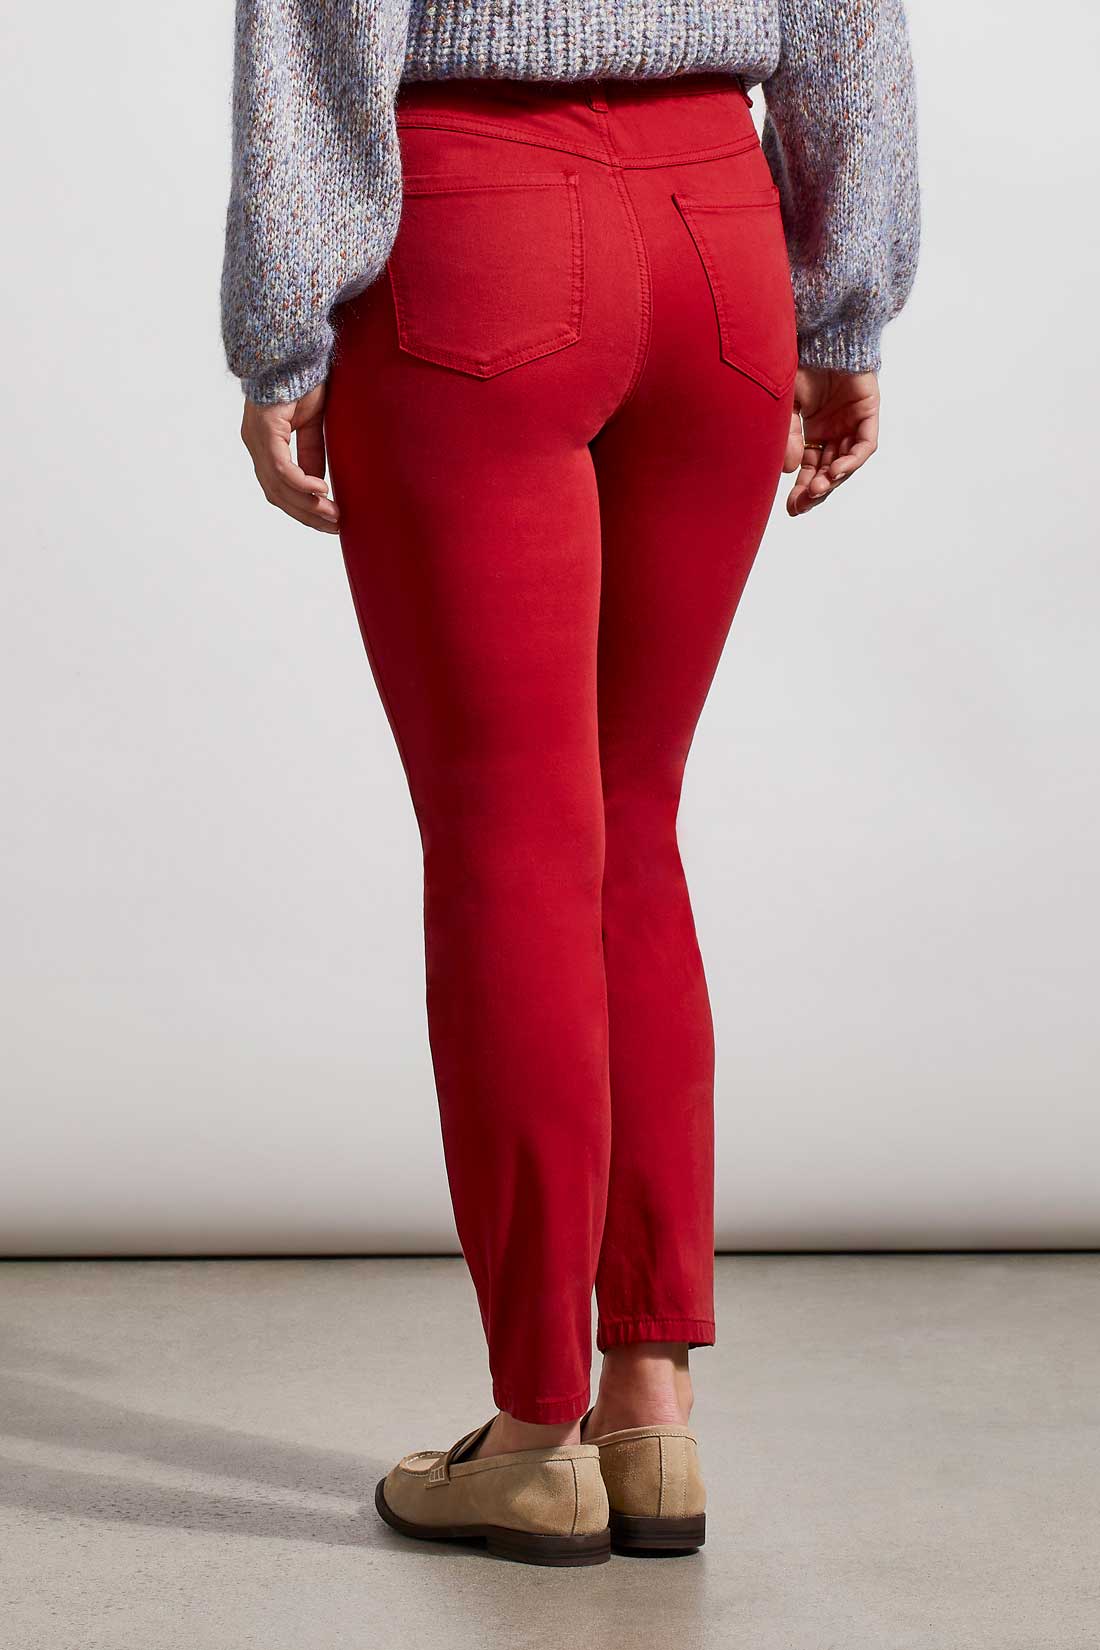 A woman wearing red Tribal Audrey Icon Pull On skinny jeans and a blue sweater with a flattering fit.